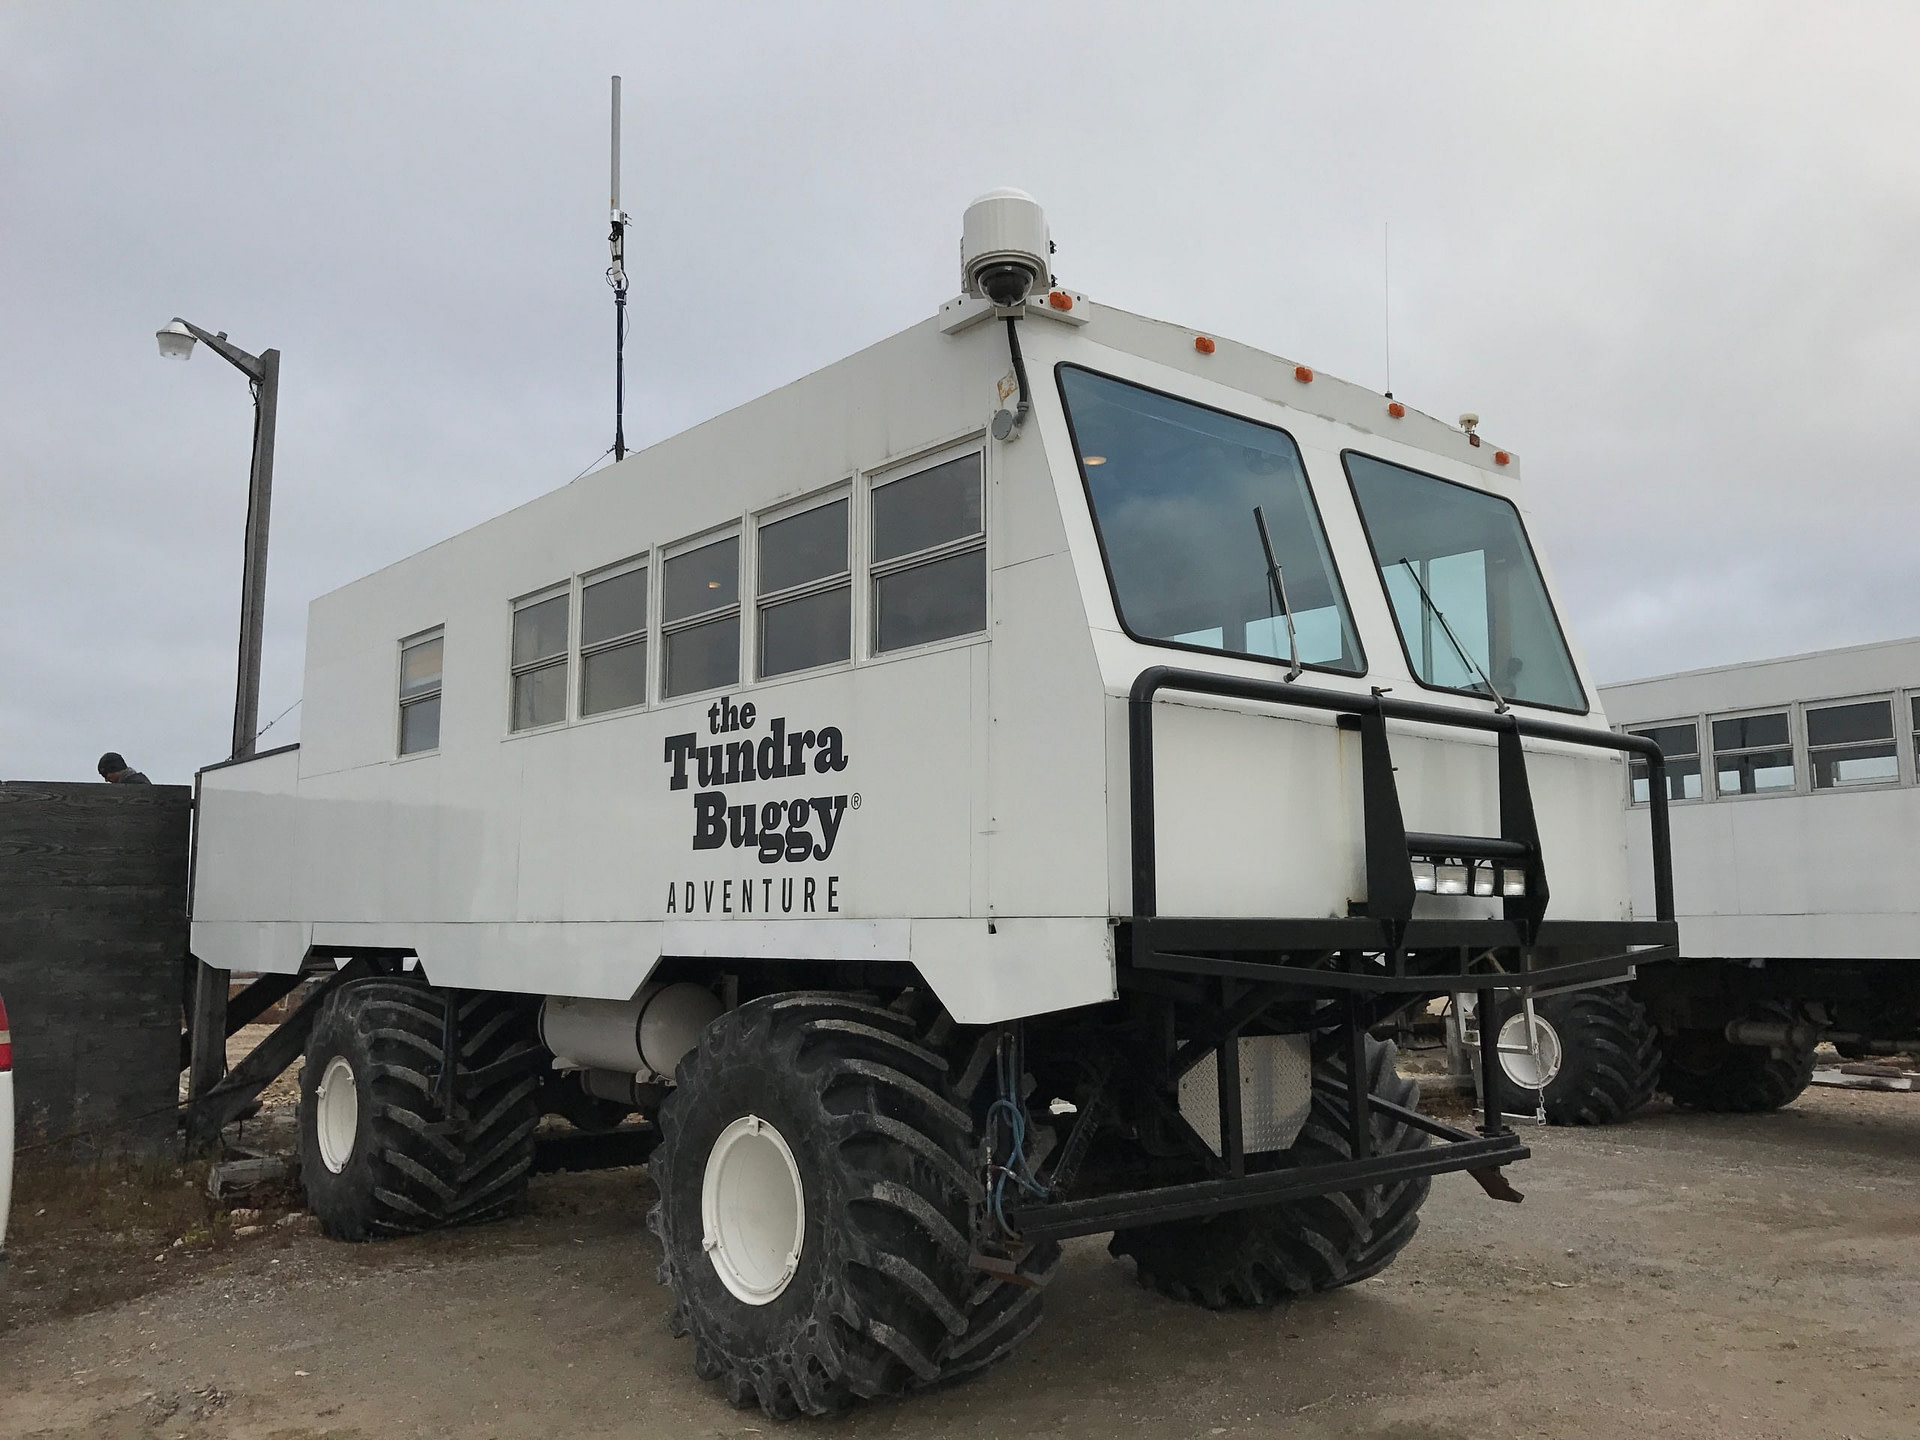 XHeat Climate Controlled PTZ Camera Enclosure System For Extreme Cold Conditions Installed On A Tundra Buggy Roaming Wapusk National Park In Churchill Manitoba Canada Overlooking Polar Bears 